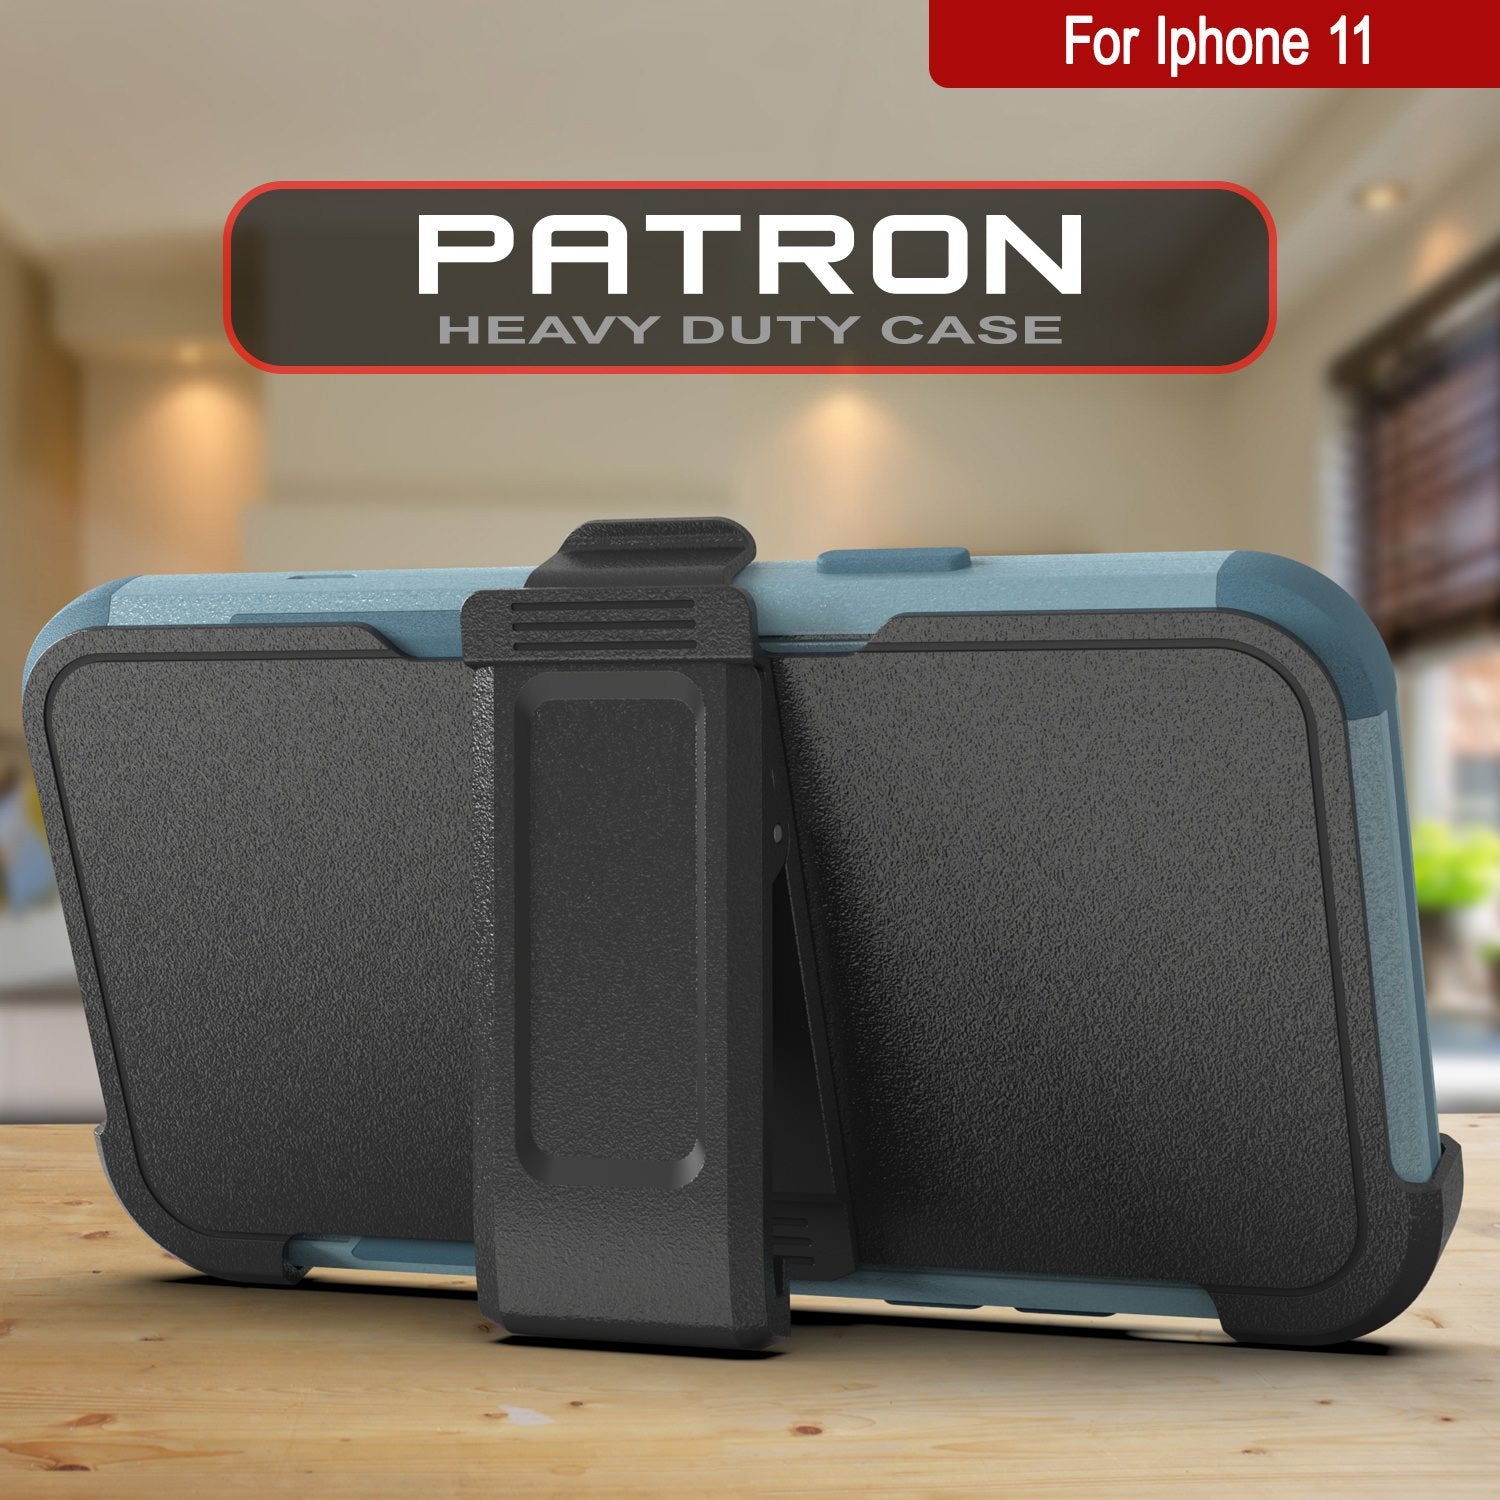 Punkcase for iPhone 11 Belt Clip Multilayer Holster Case [Patron Series] [Mint]